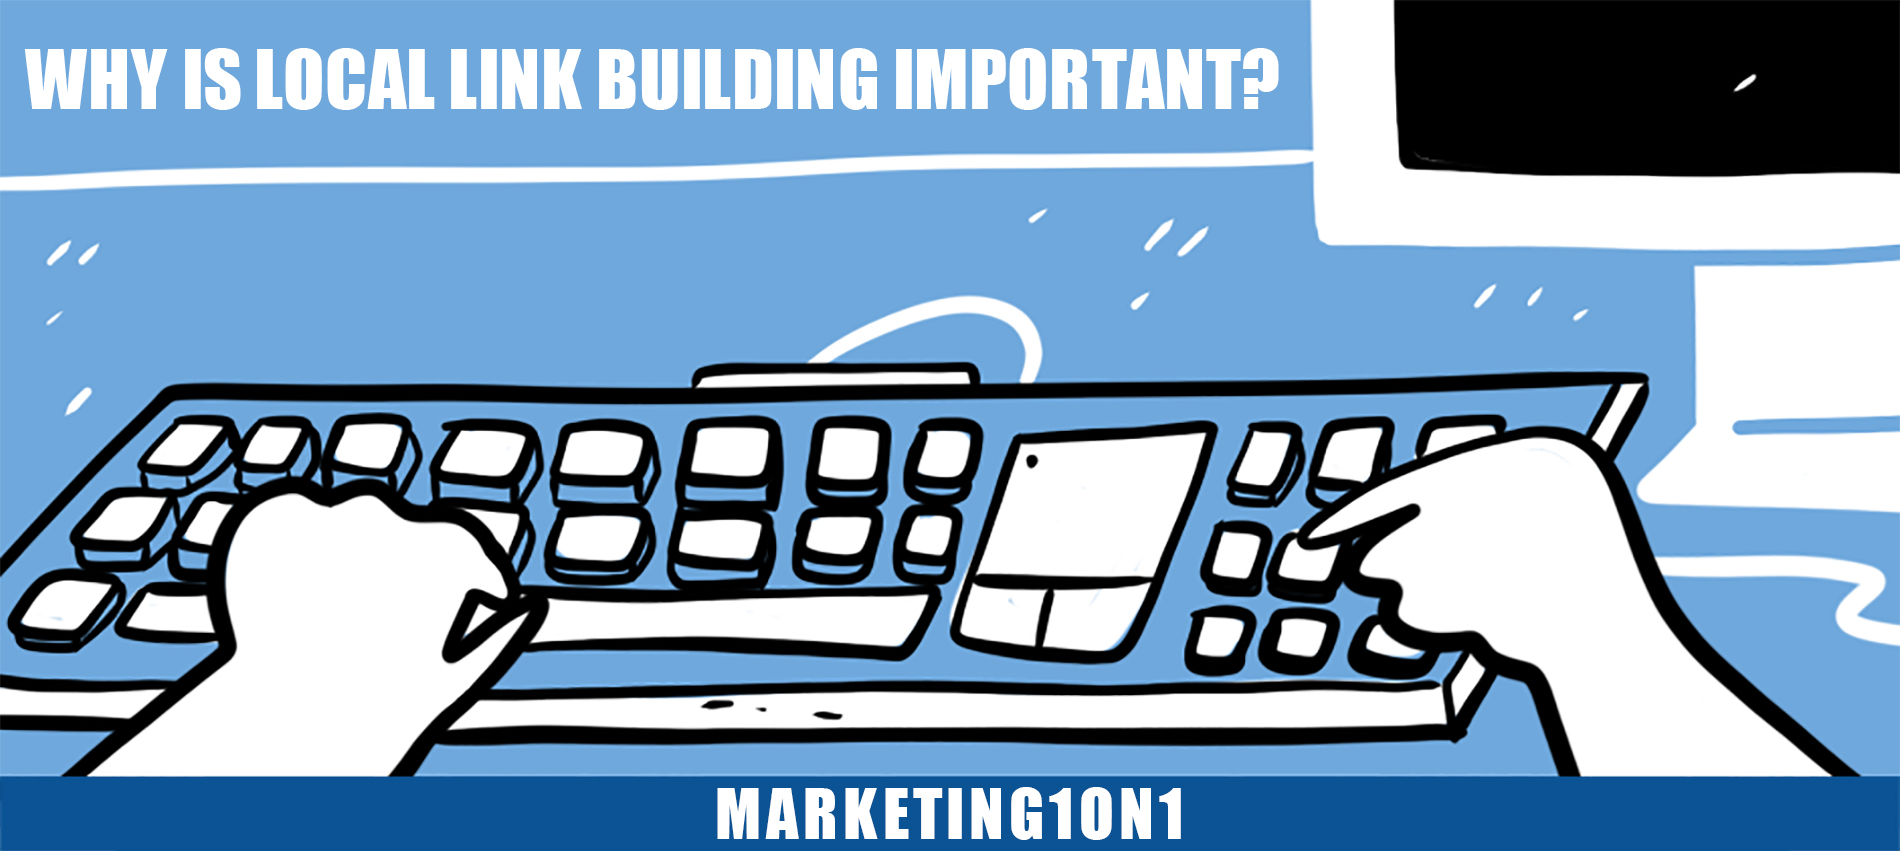 Why is local link building important?